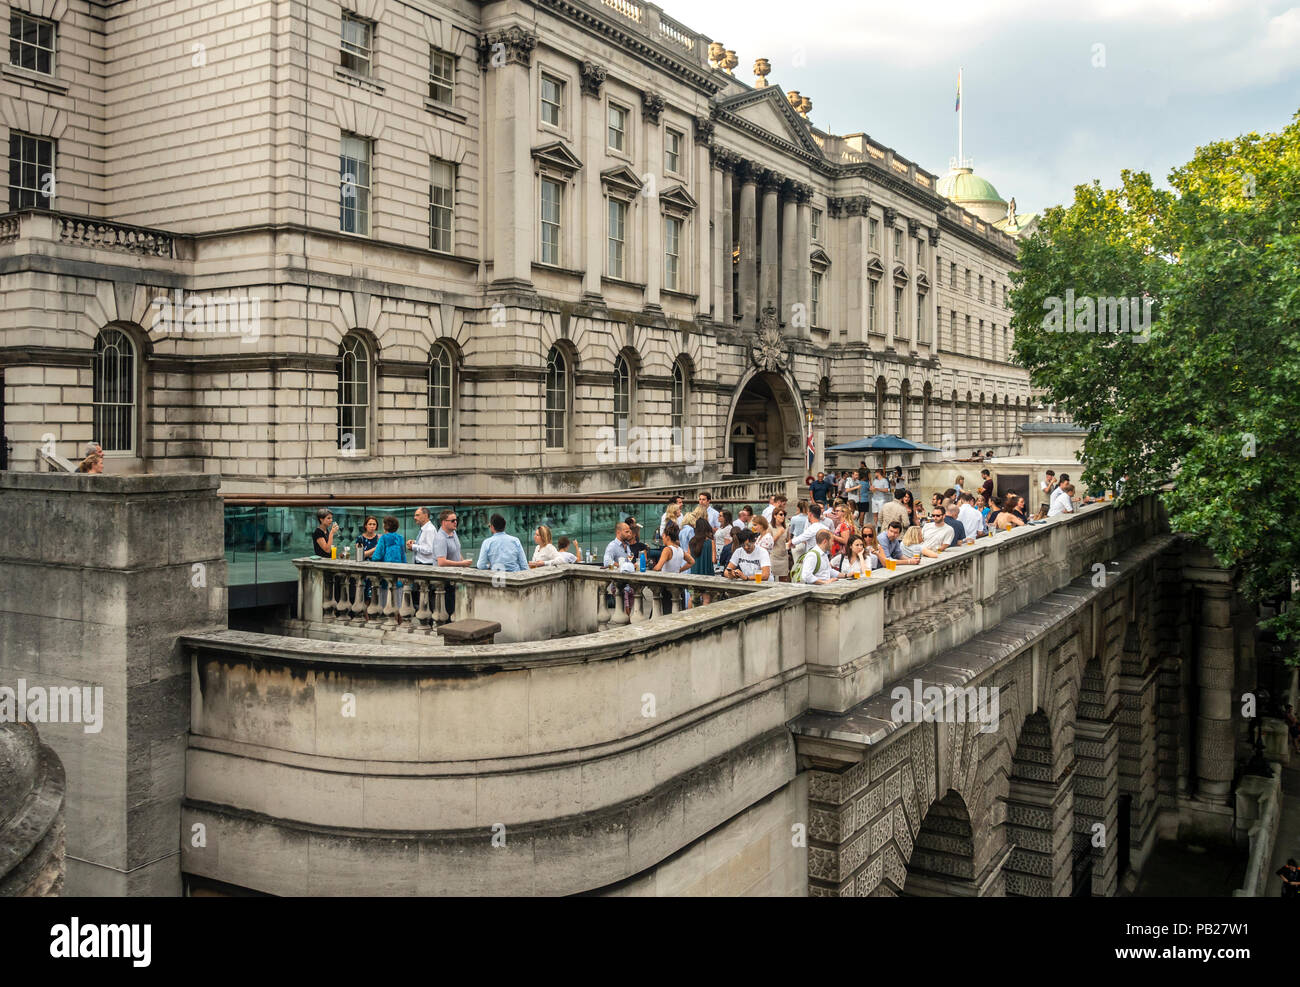 A function with people relaxing and having a drink on the busy terrace outside Somerset House, a Grade 1 Listed Building in London, England, UK. Stock Photo